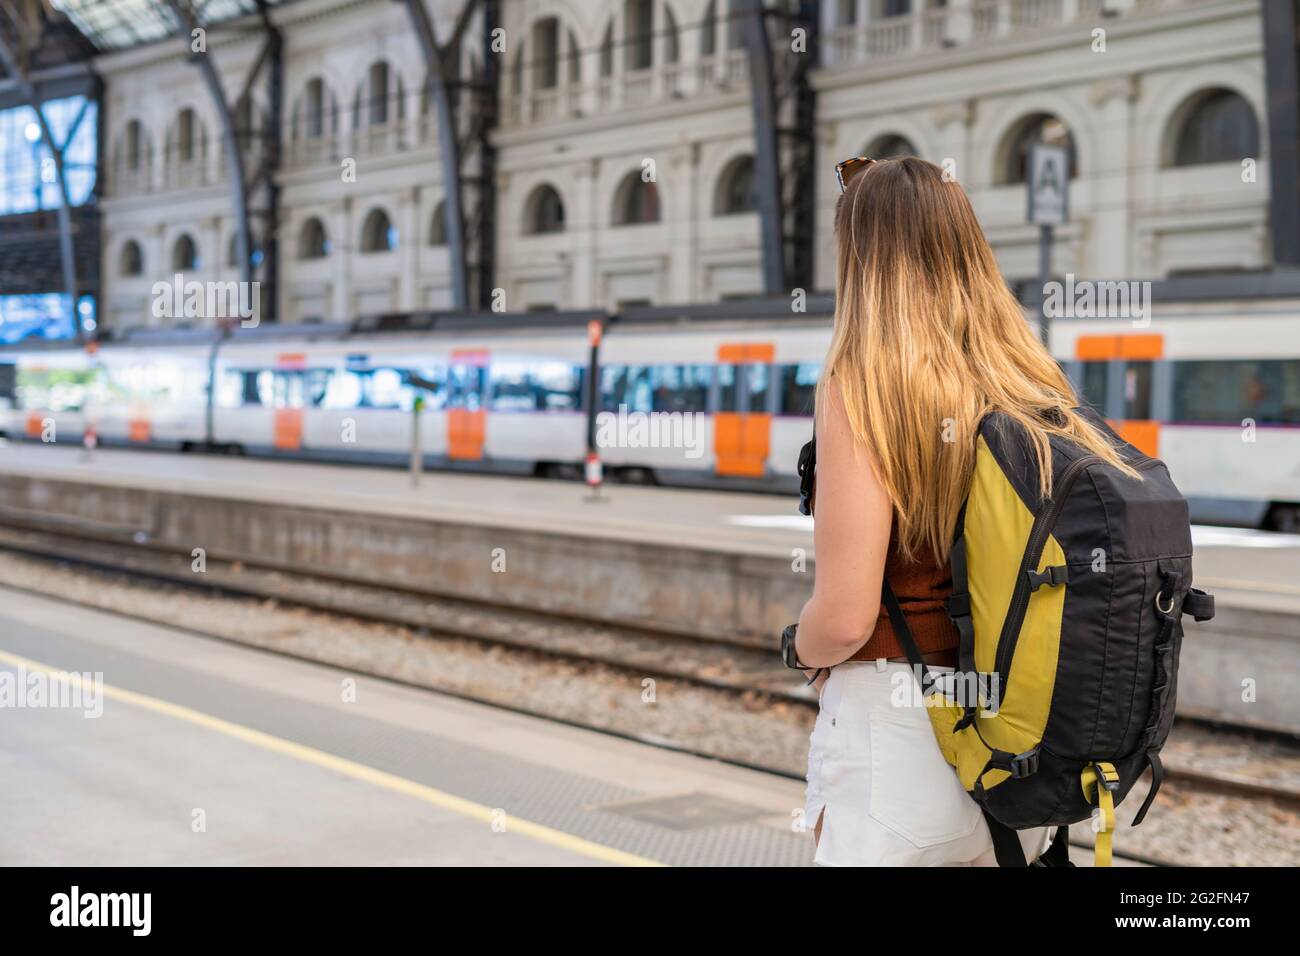 Young woman with backpack waiting at train station platform Stock Photo